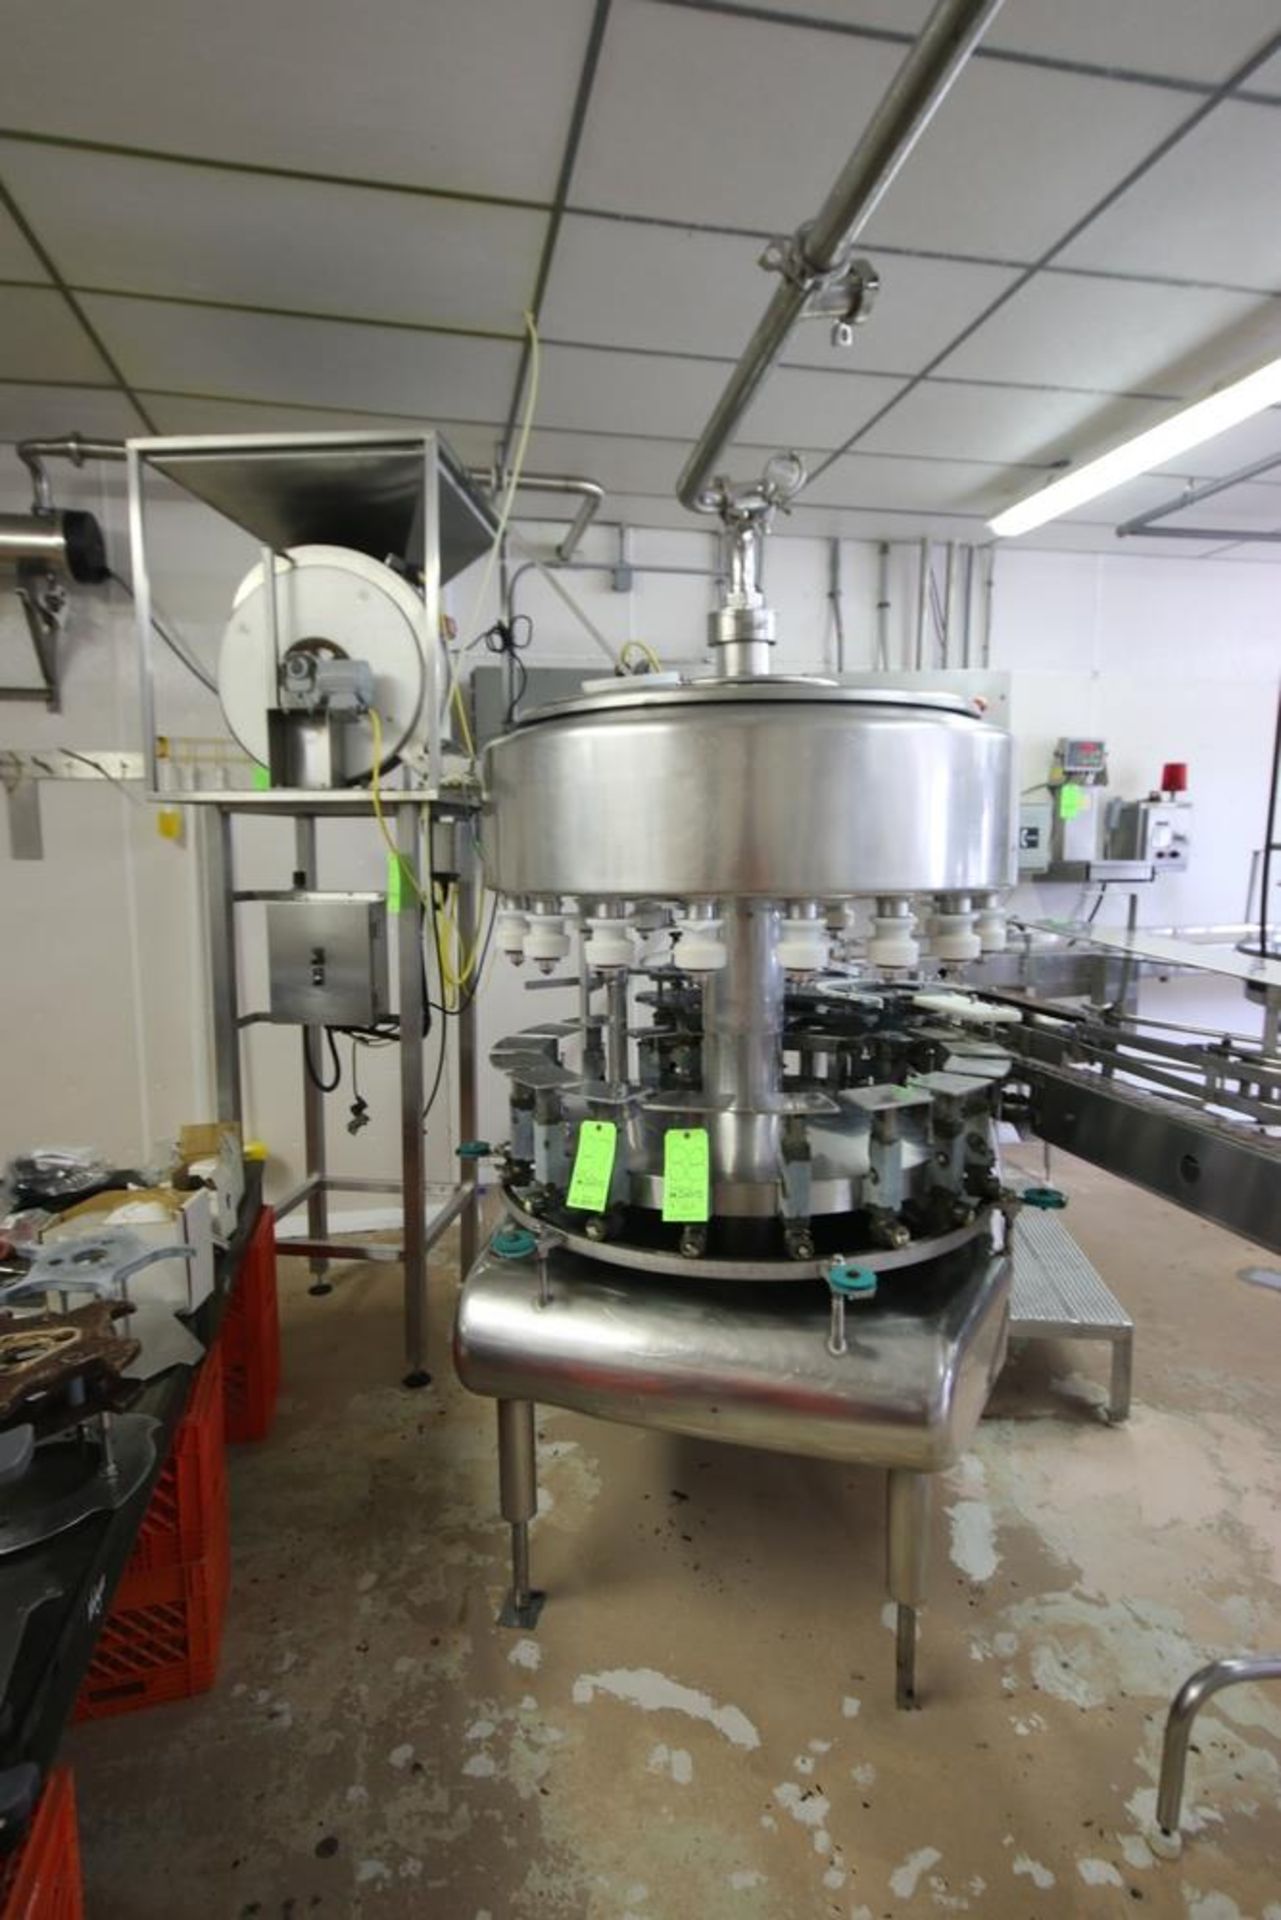 Federal 18-Valve Rotary Filler, with 5-Station Rotary Capper, with Stand Alone Capping Feed - Image 5 of 22